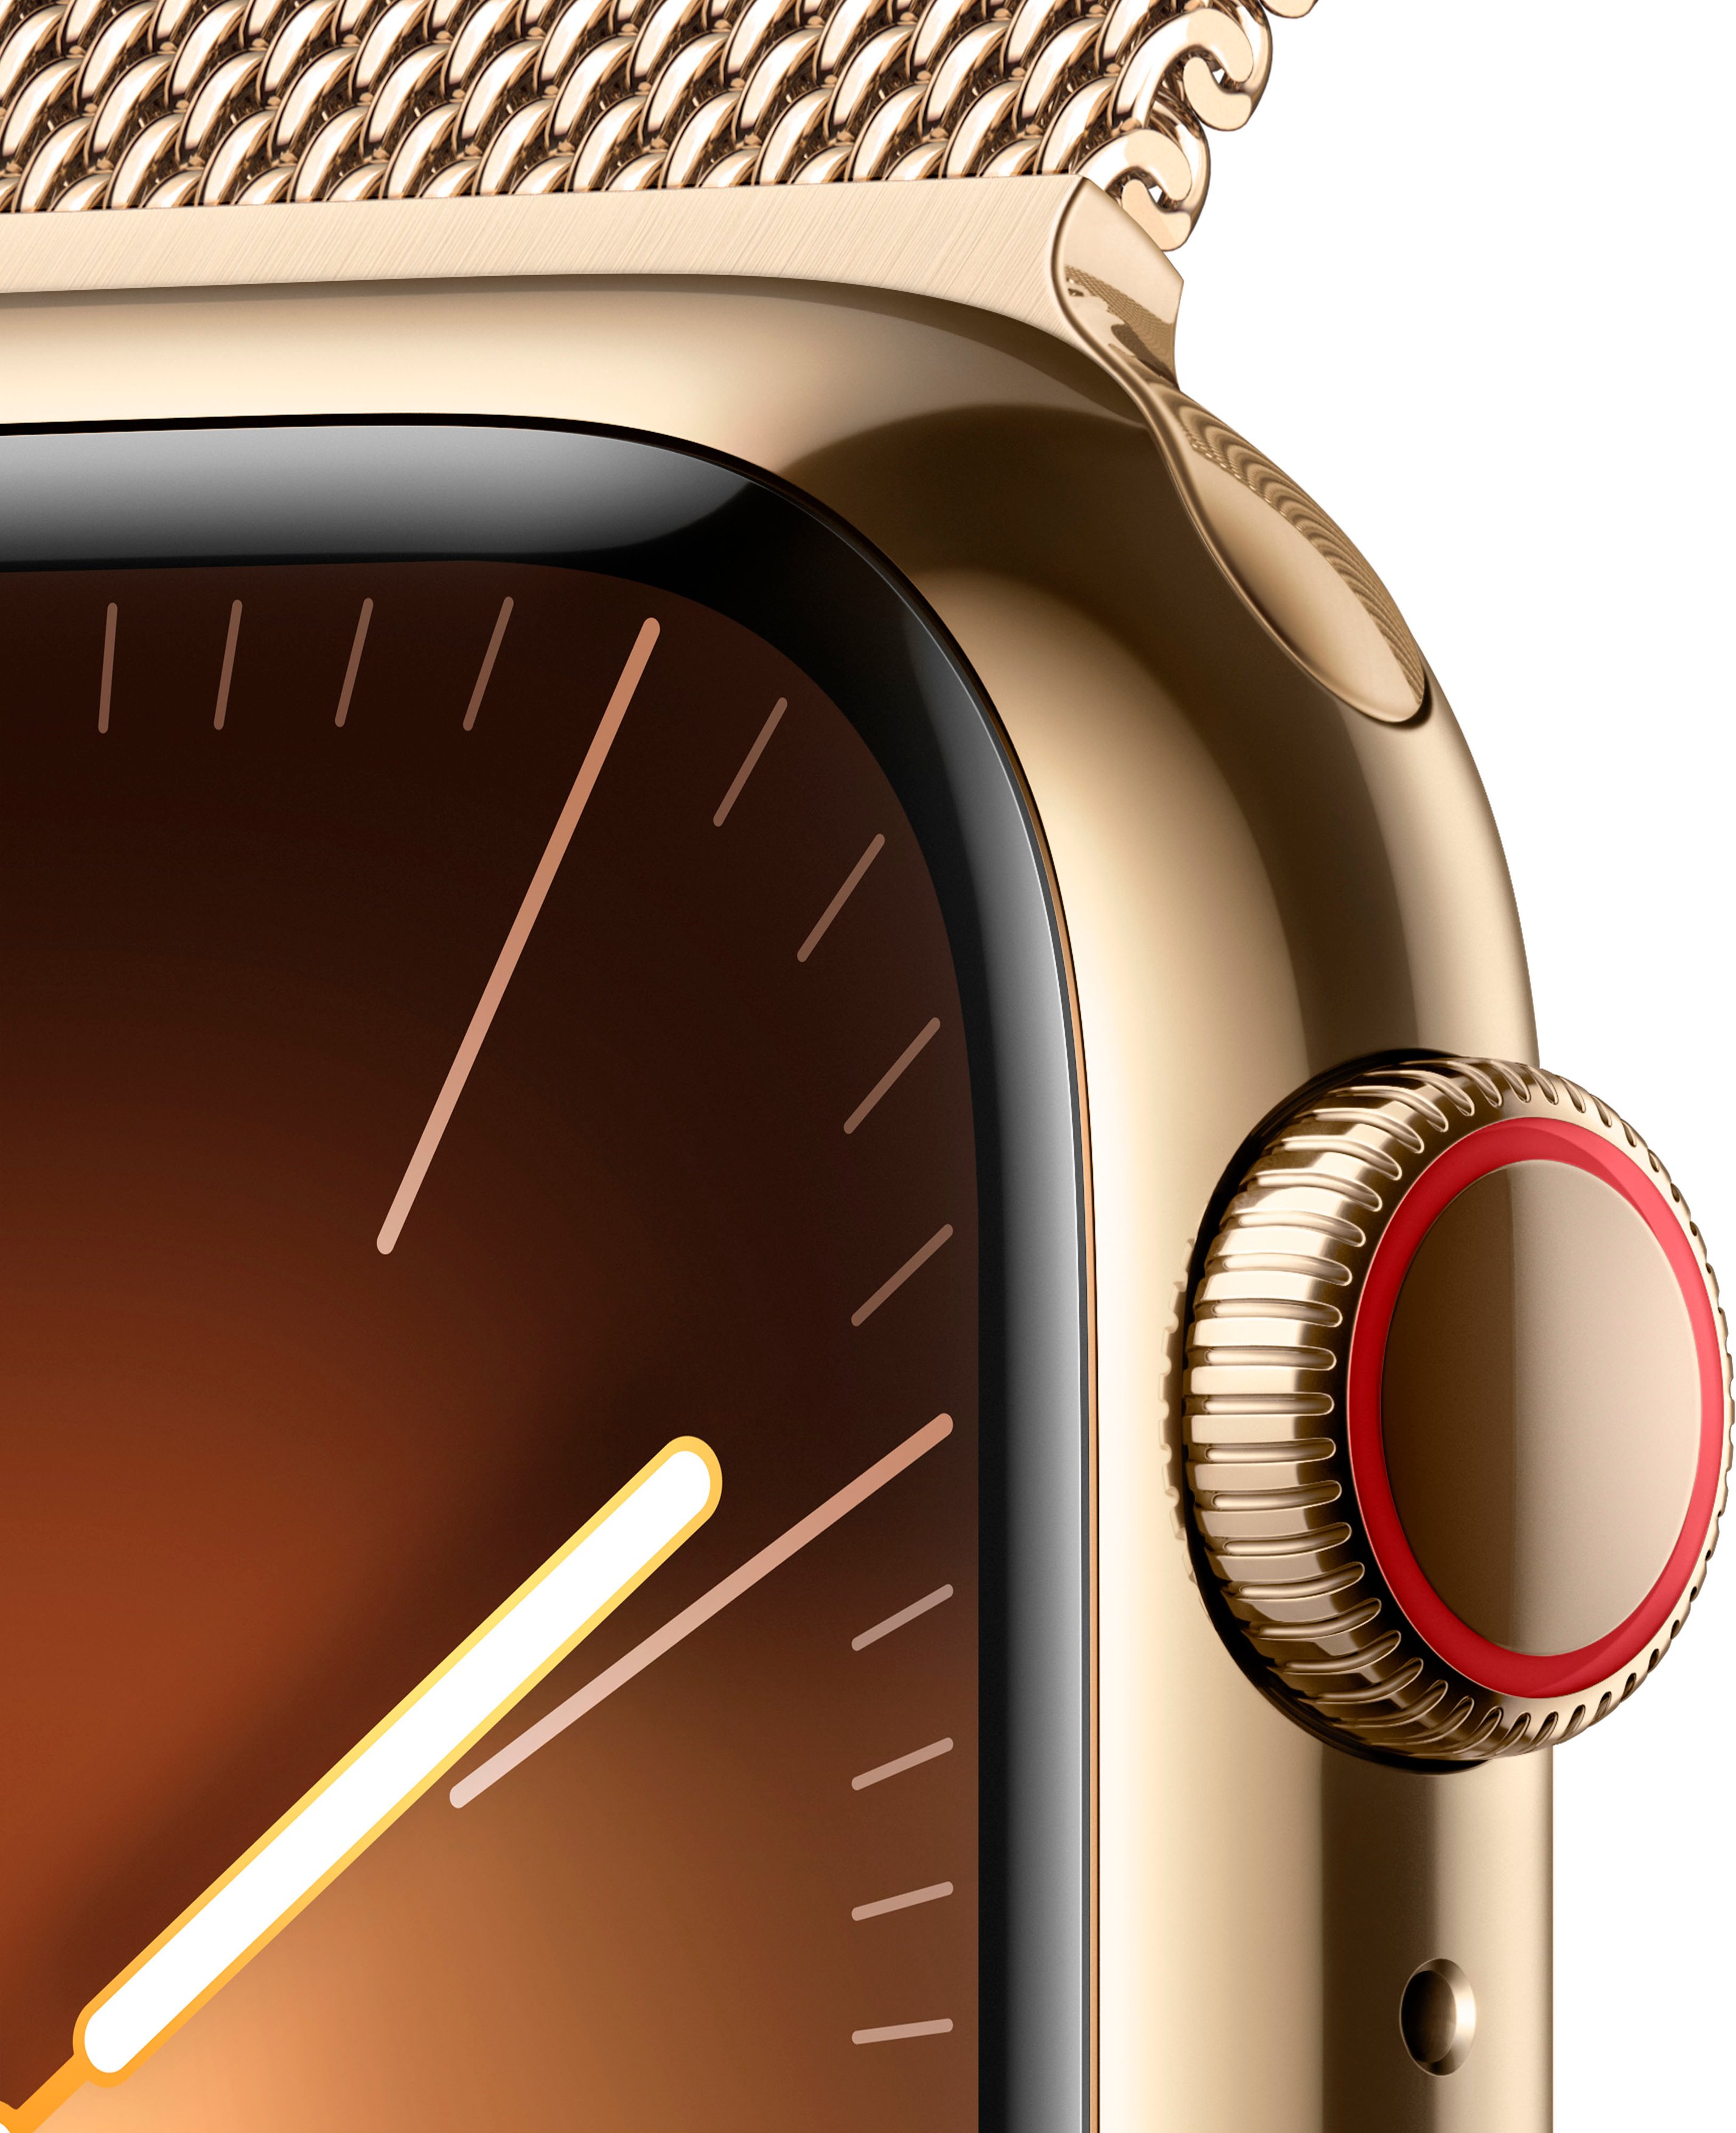 41mm Gold + Steel Buy with Stainless Loop 9 (GPS Series Milanese Case Watch - Gold MRJ73LL/A Cellular) Best Gold Apple